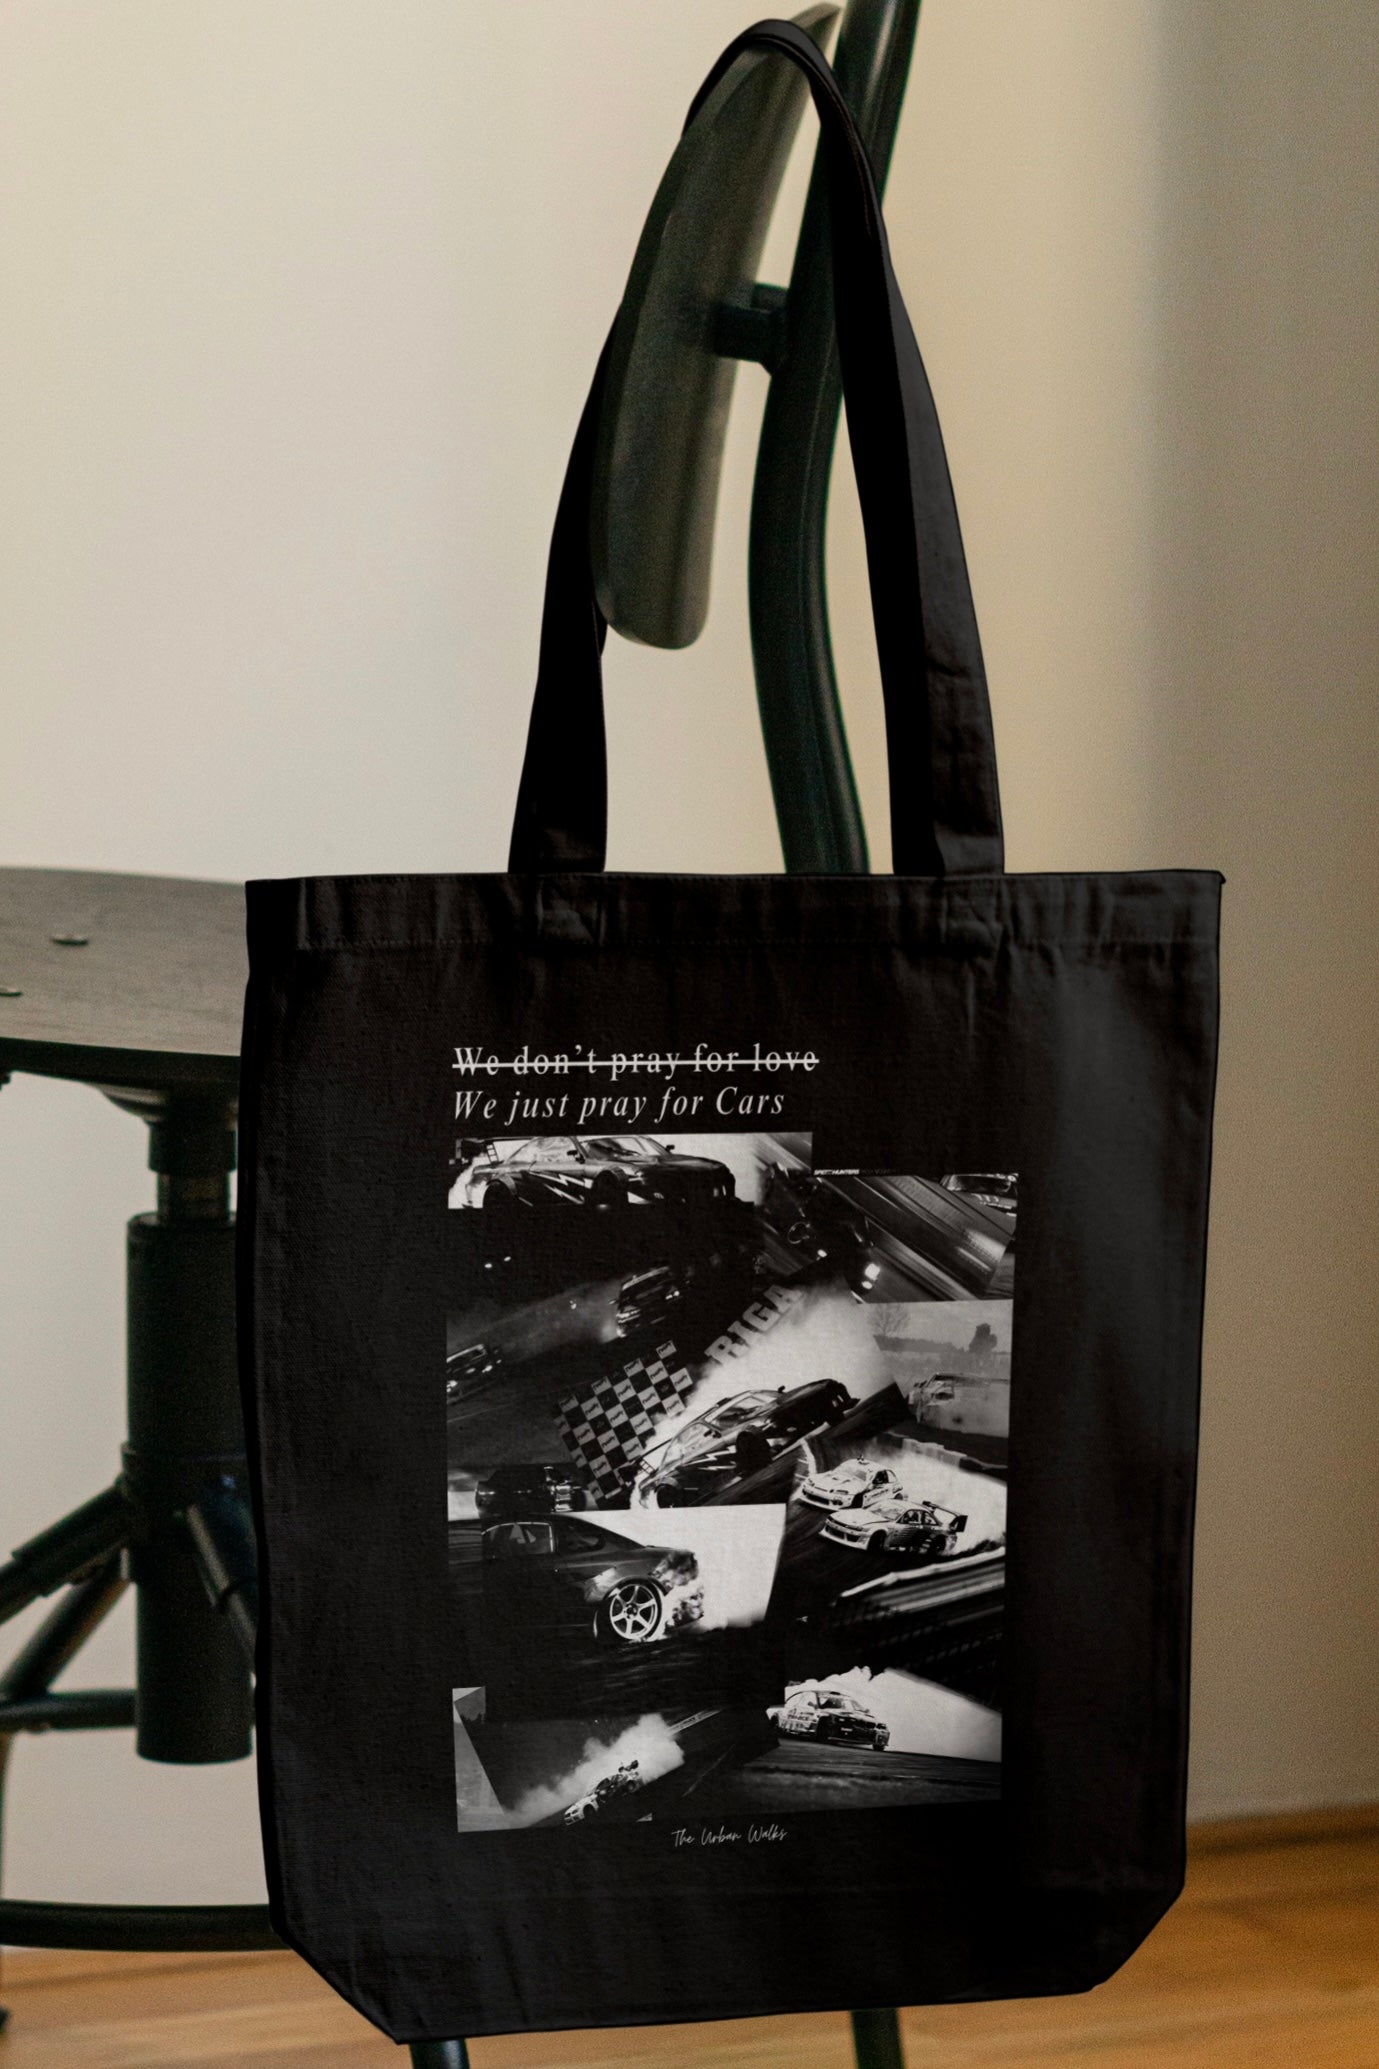 The Weeknd We Just Pray For Cars Black Tote Bag with zipper